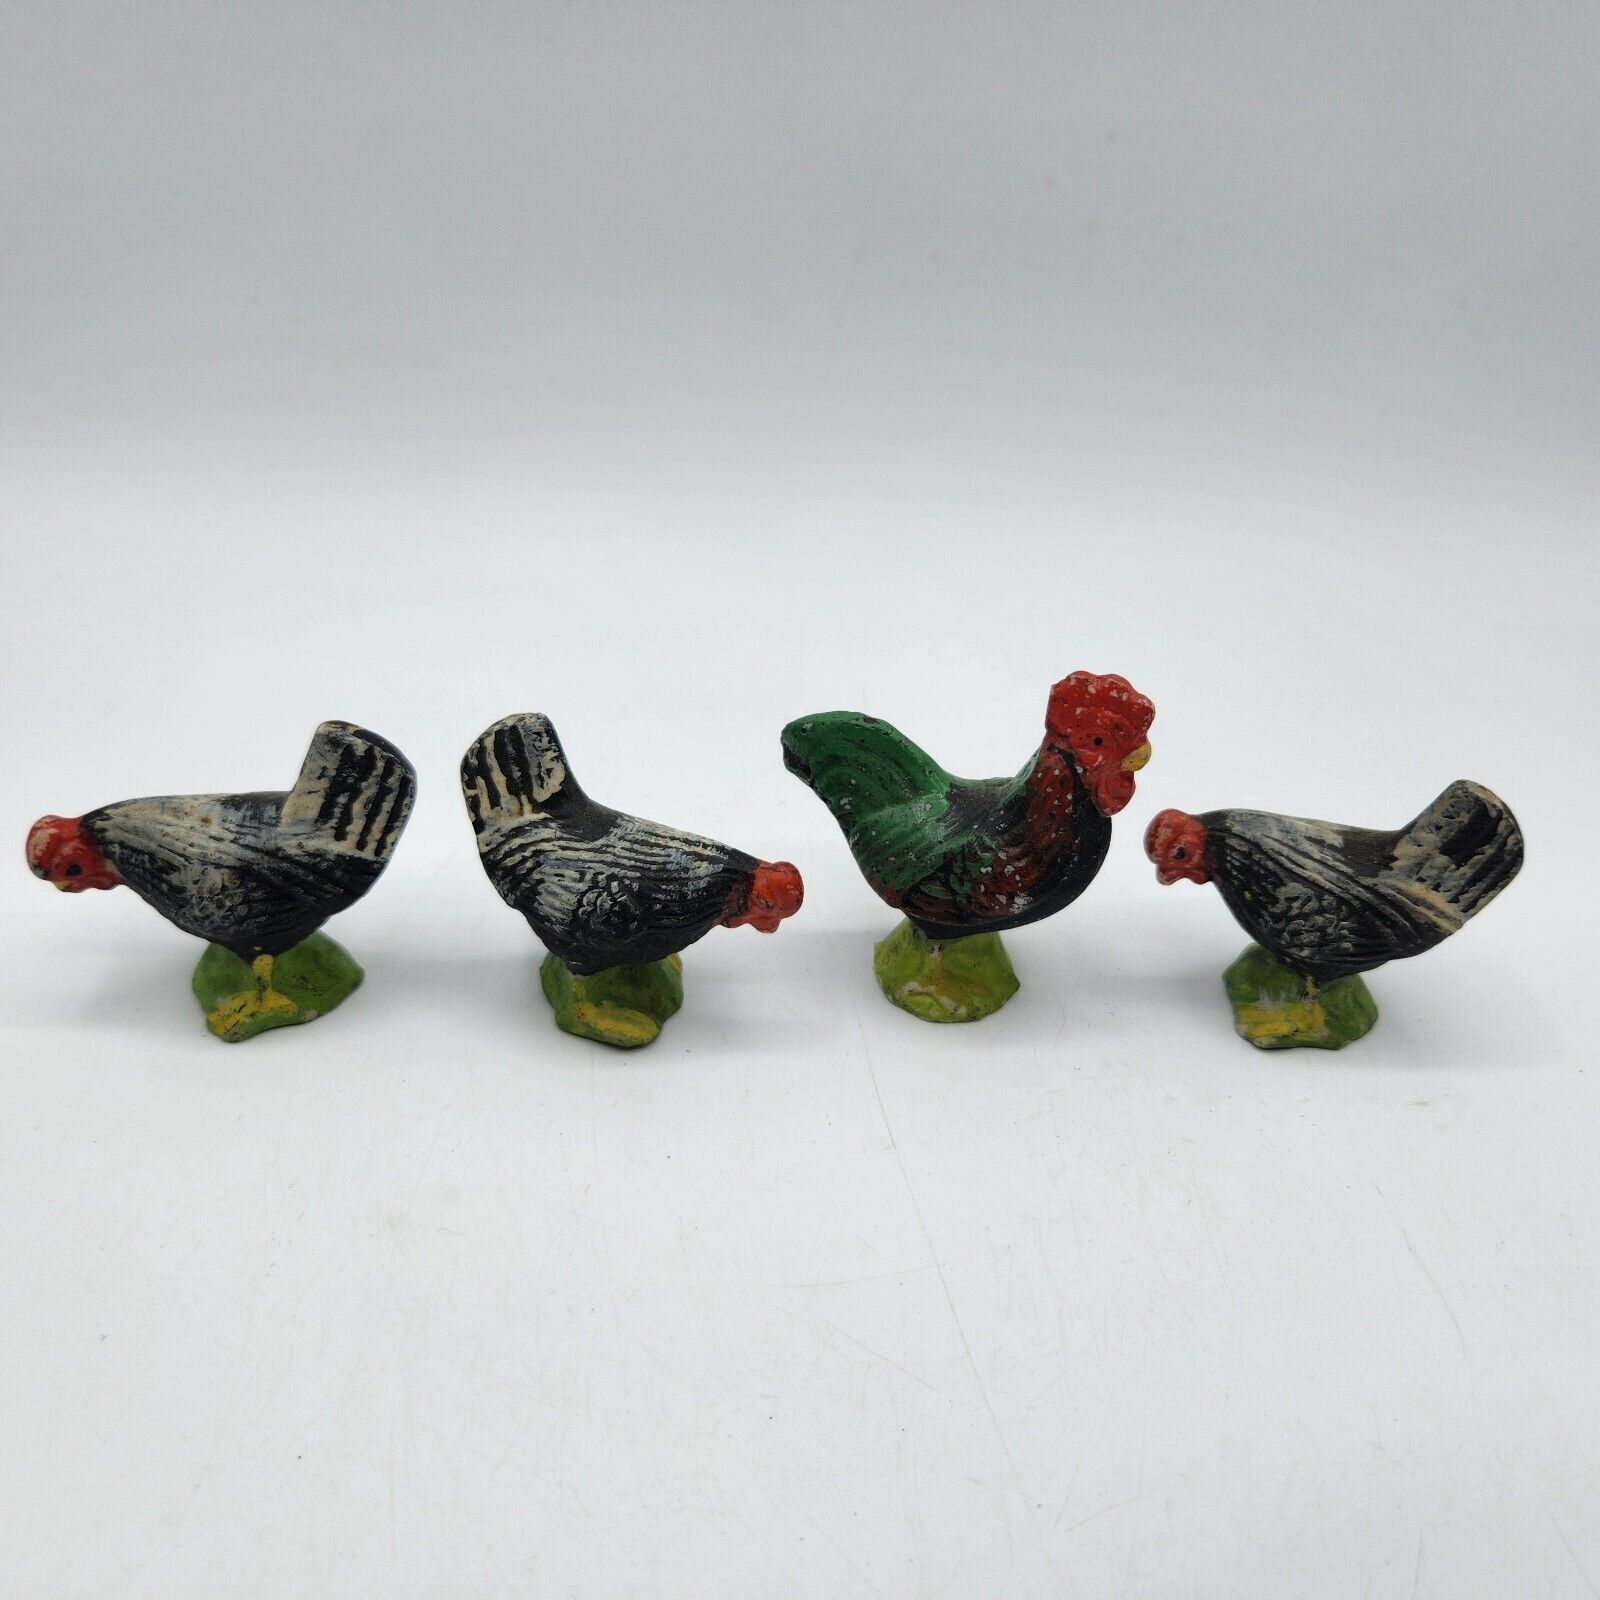 Vintage Rooster Chickens Figurines lot of 4 Japan